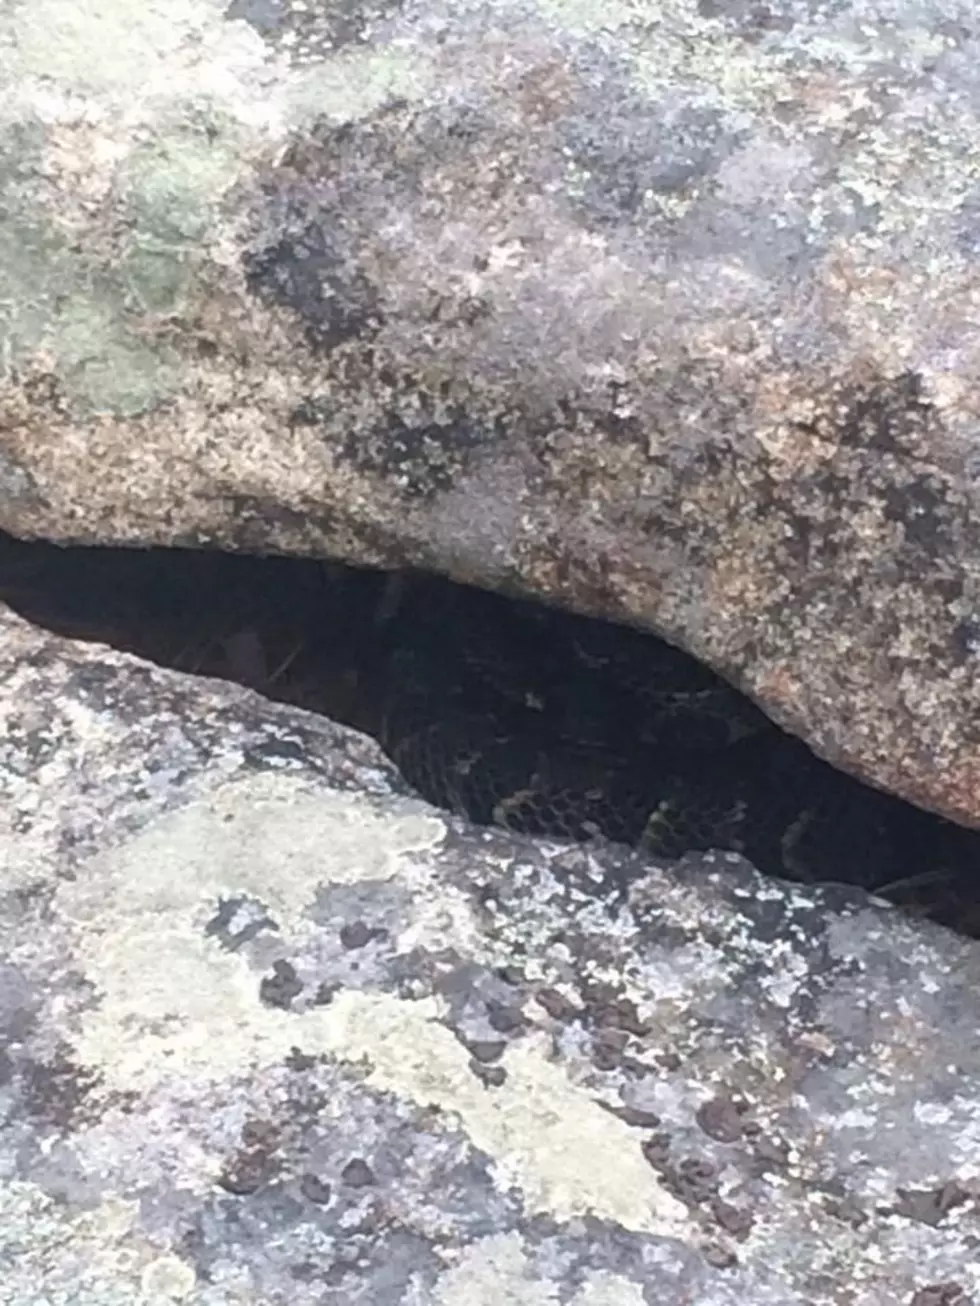 Can You See What’s Hiding in Between These Rocks?